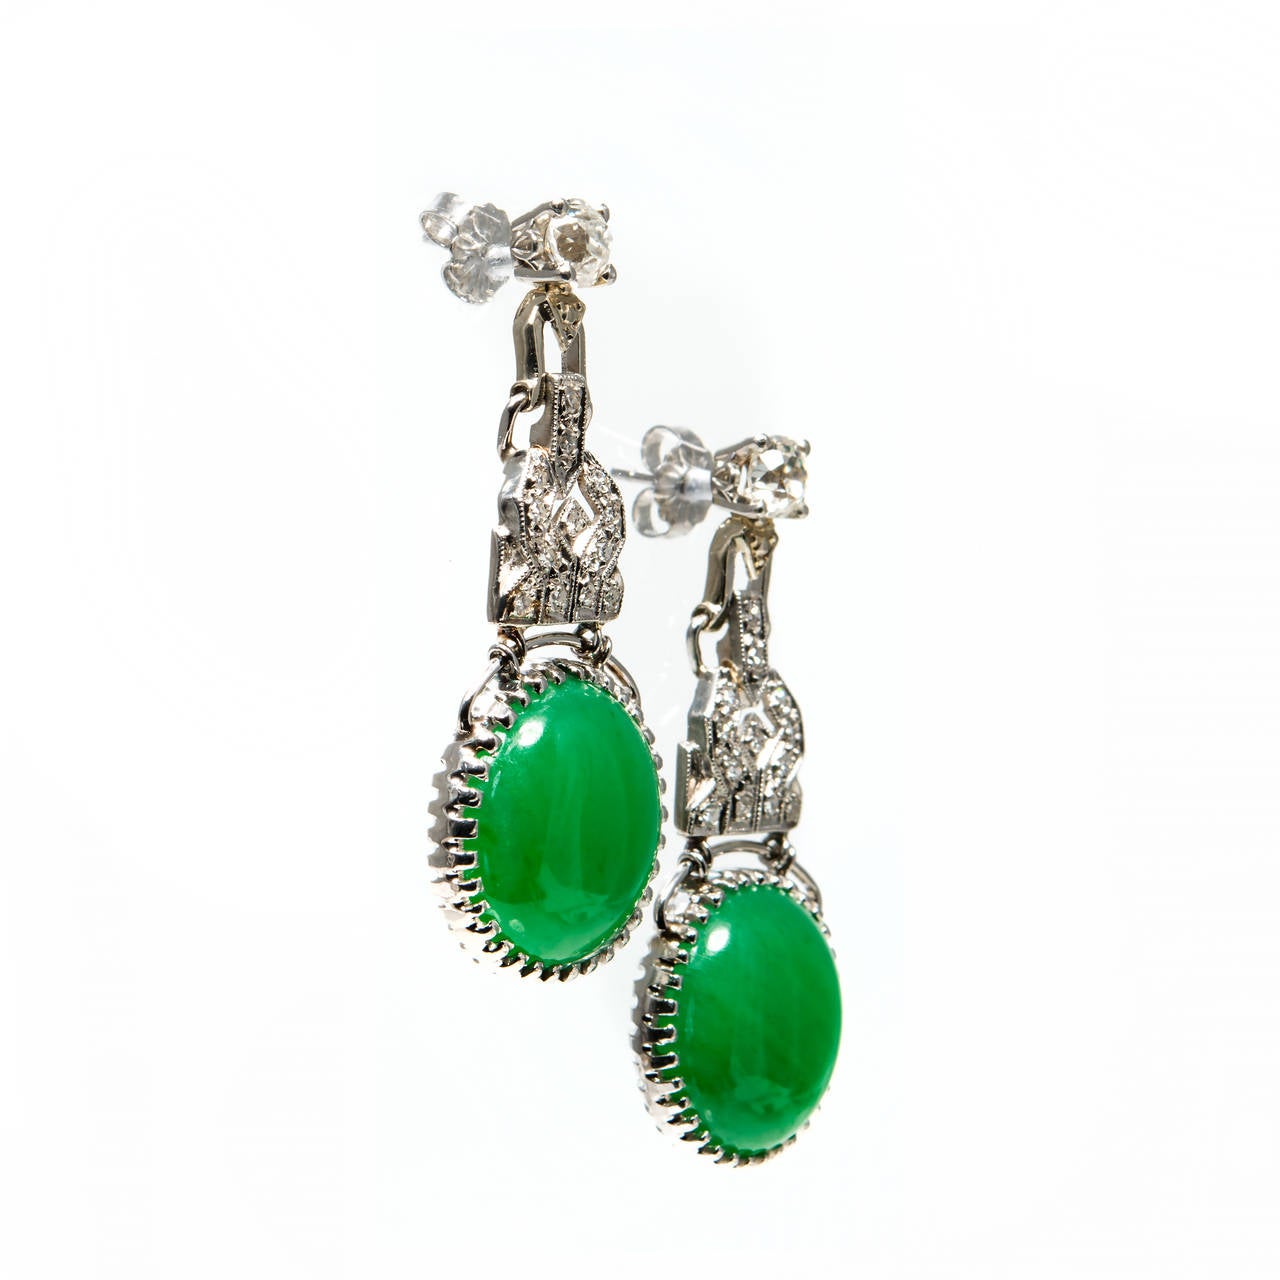 Jade and diamond dangle earrings set in handmade platinum.  Well cut old mine diamonds on the top with pave accent diamonds. Certified natural untreated undyed green Jadeite Jade drops.  Each one is GIA certified.     

1 round cabochon cut Jadeite